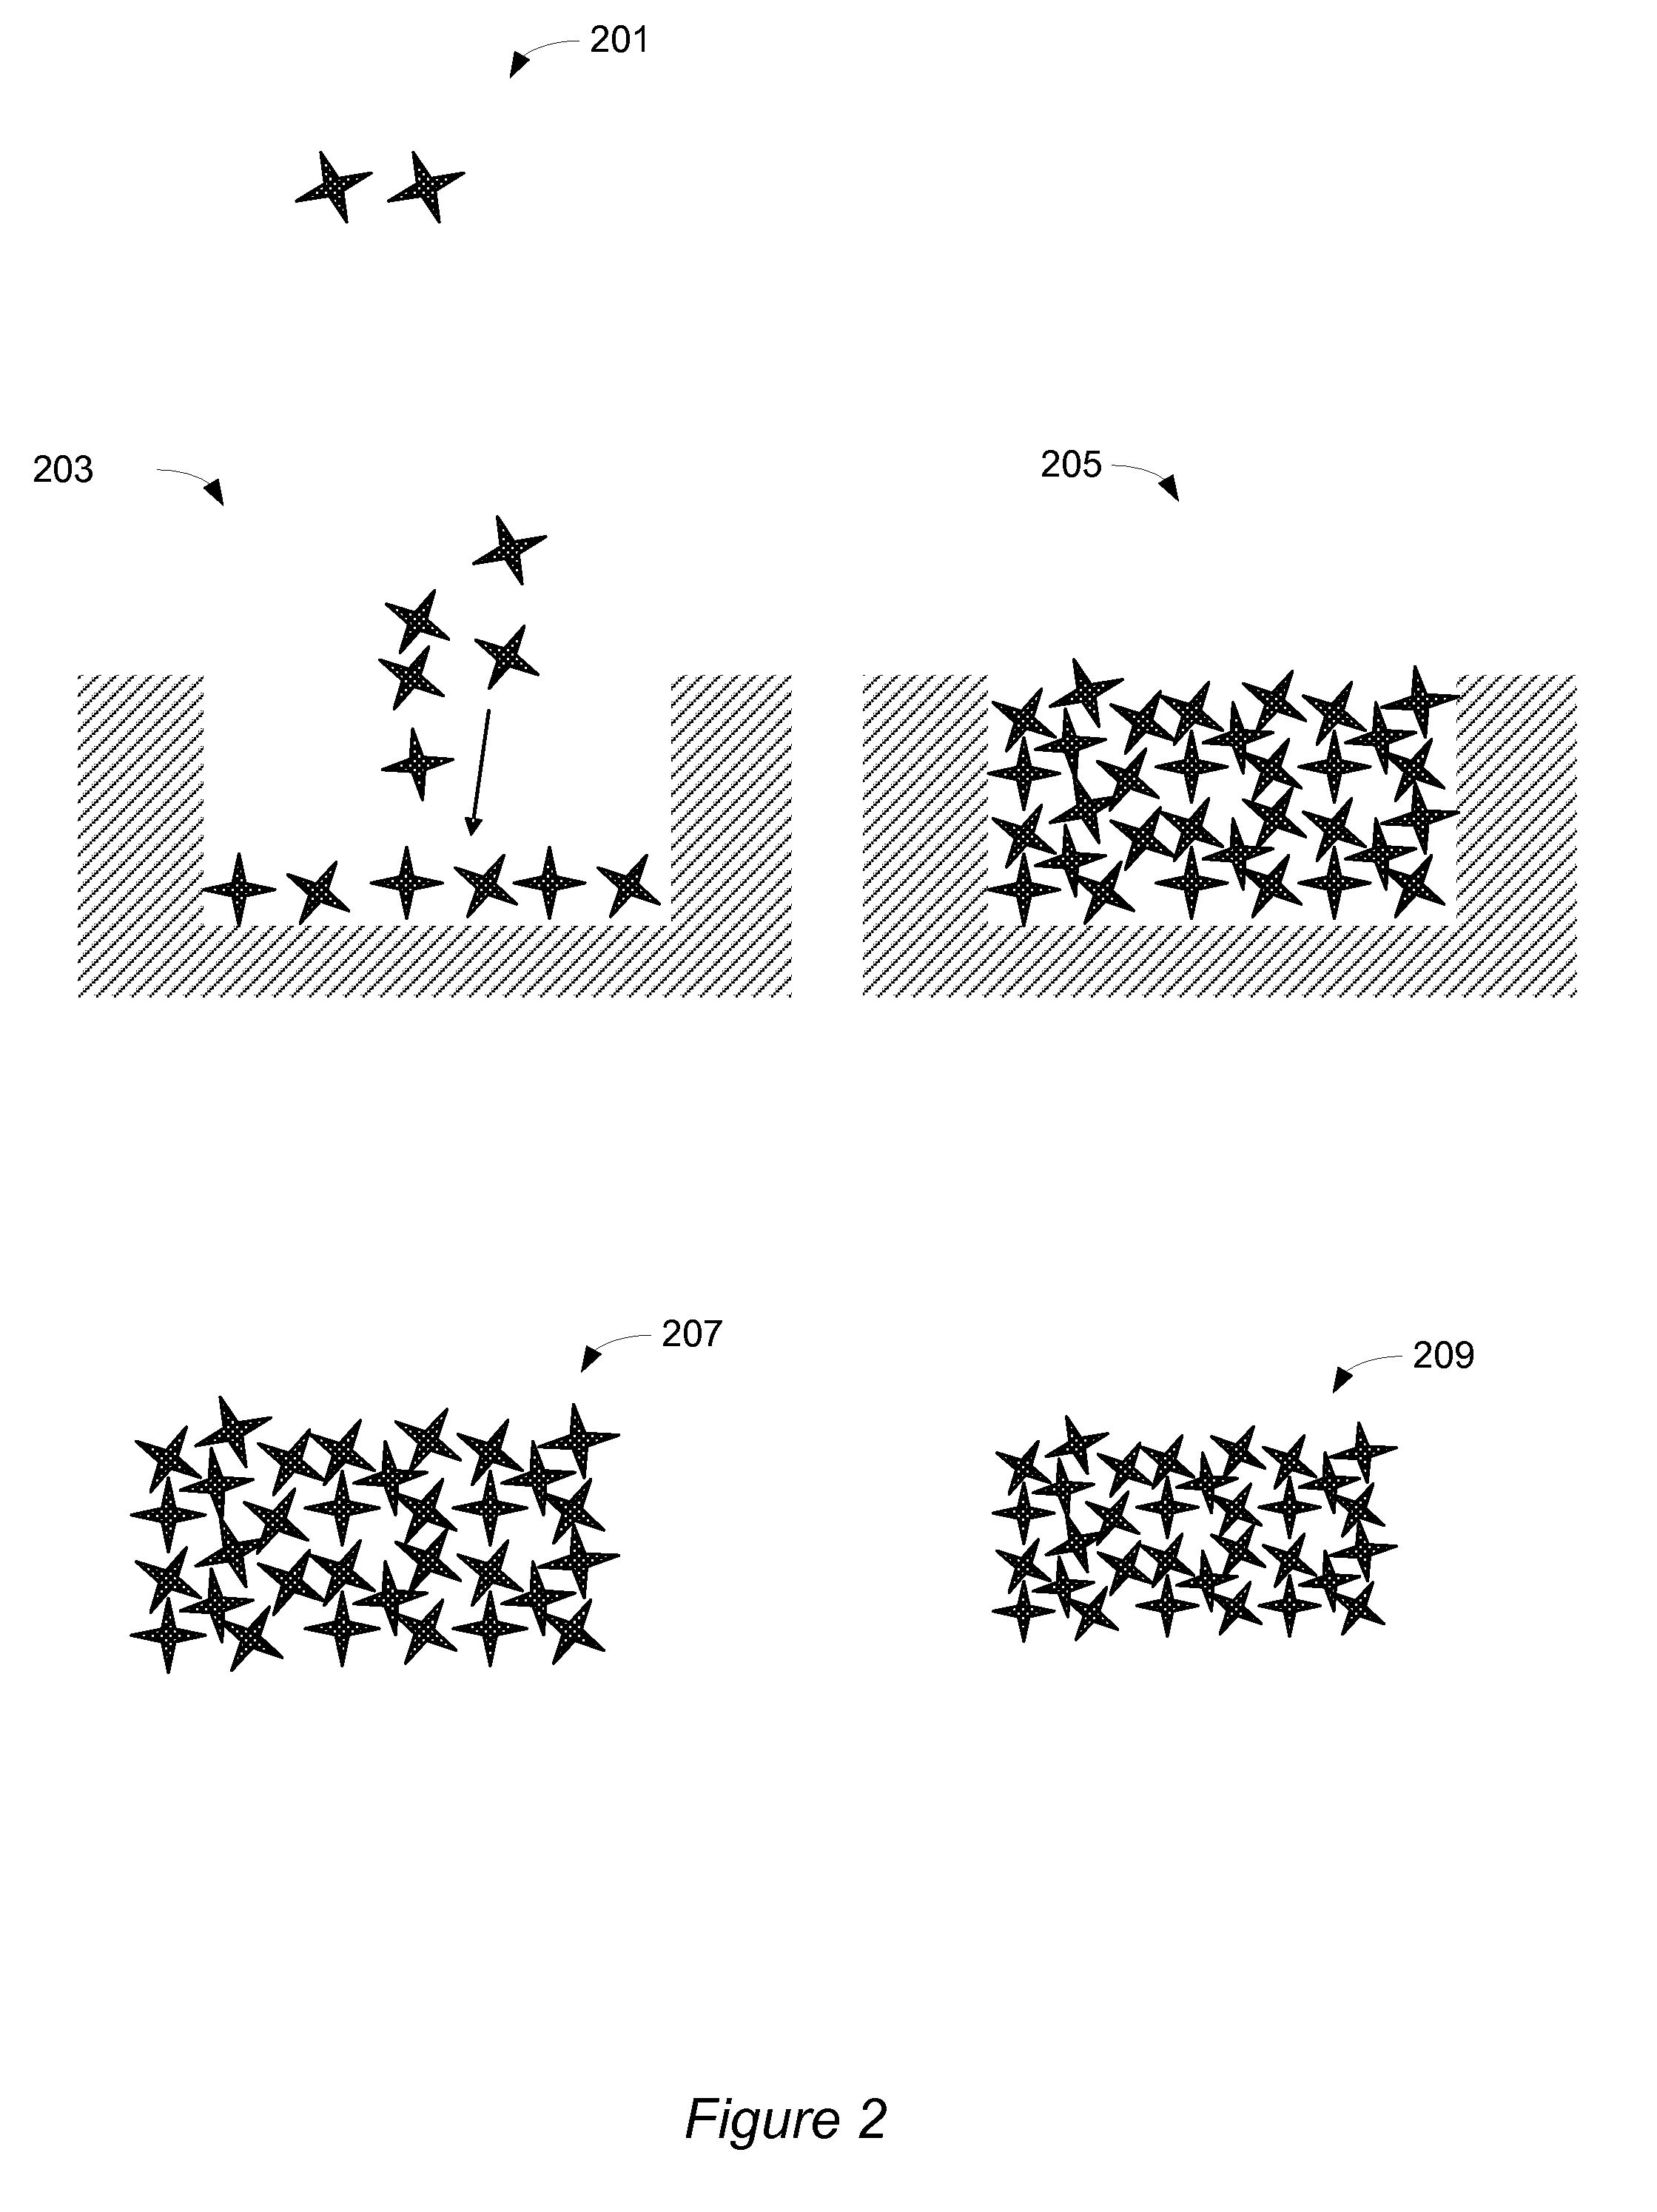 Sintered porous structure and method of making same